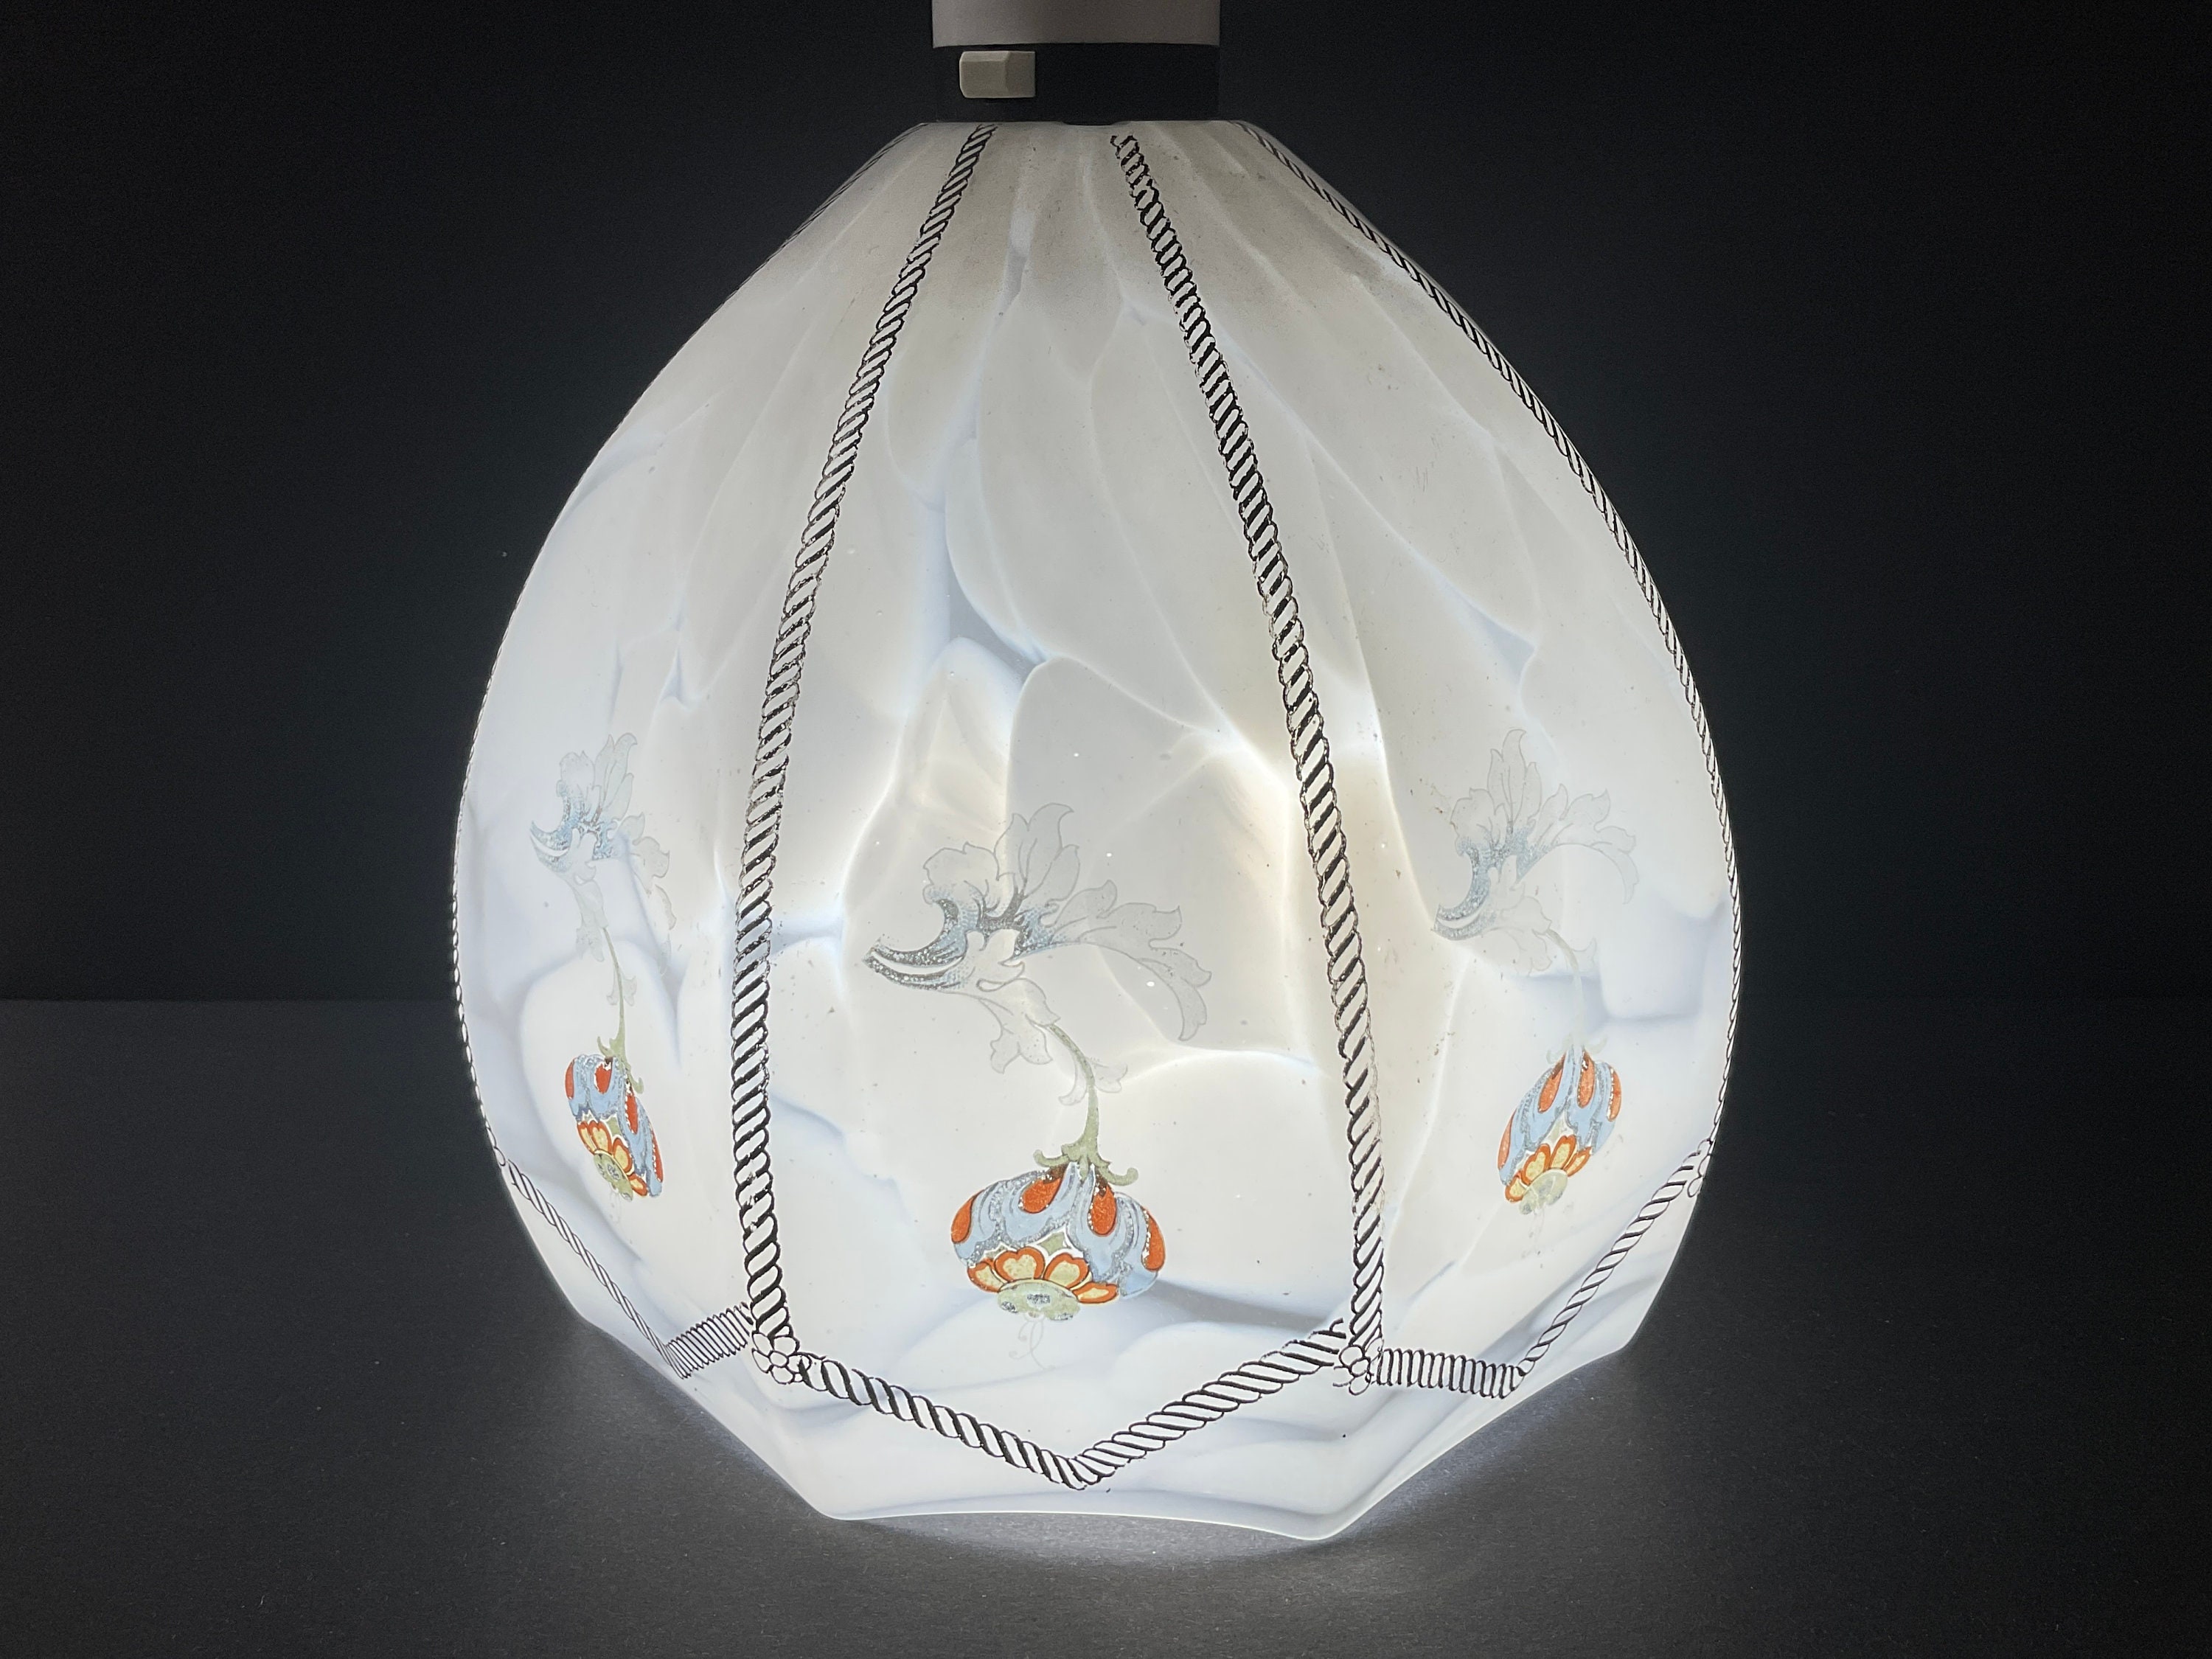 The Best Of DIY Painted And Embroidered Lampshades - creative jewish mom